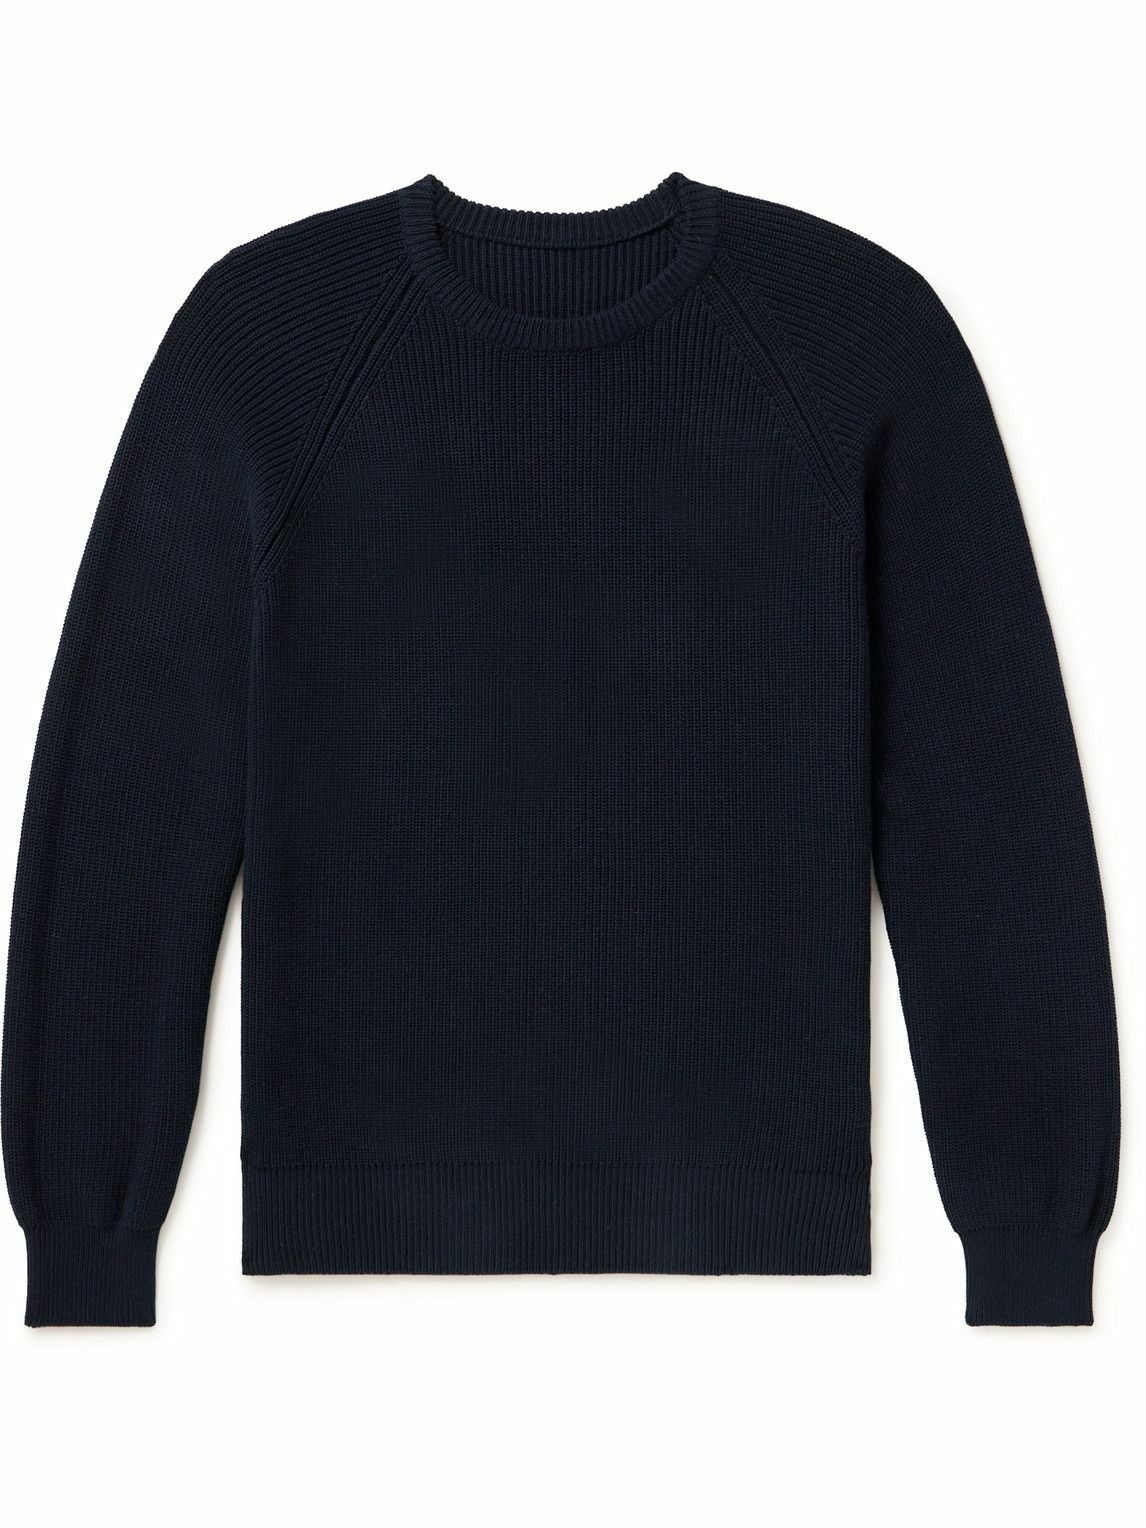 Anderson & Sheppard - Ribbed Cotton Sweater - Blue Anderson & Sheppard